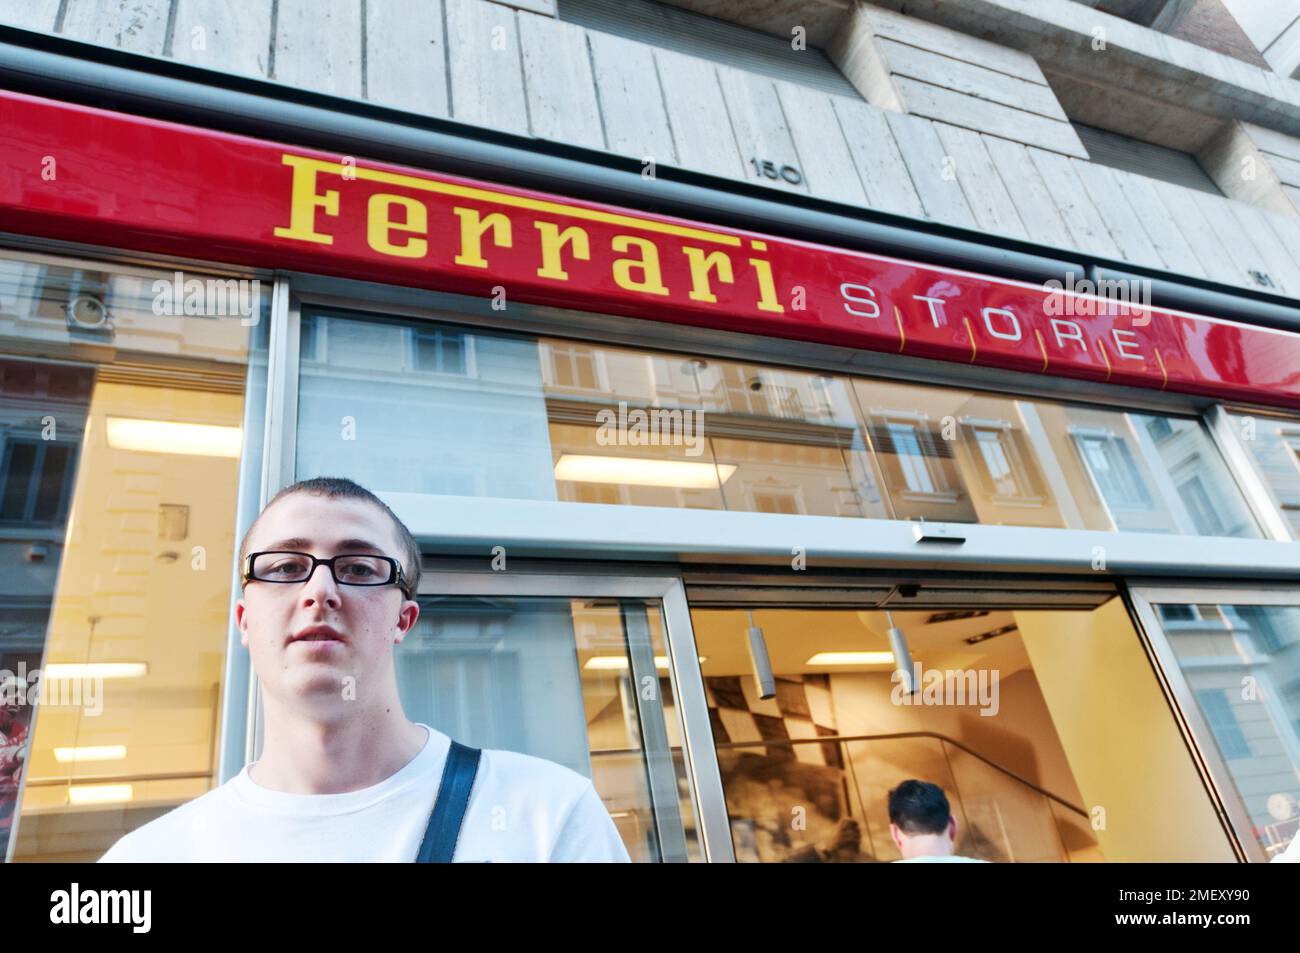 A young man outside the Ferrari Store in Rome, Italy Stock Photo